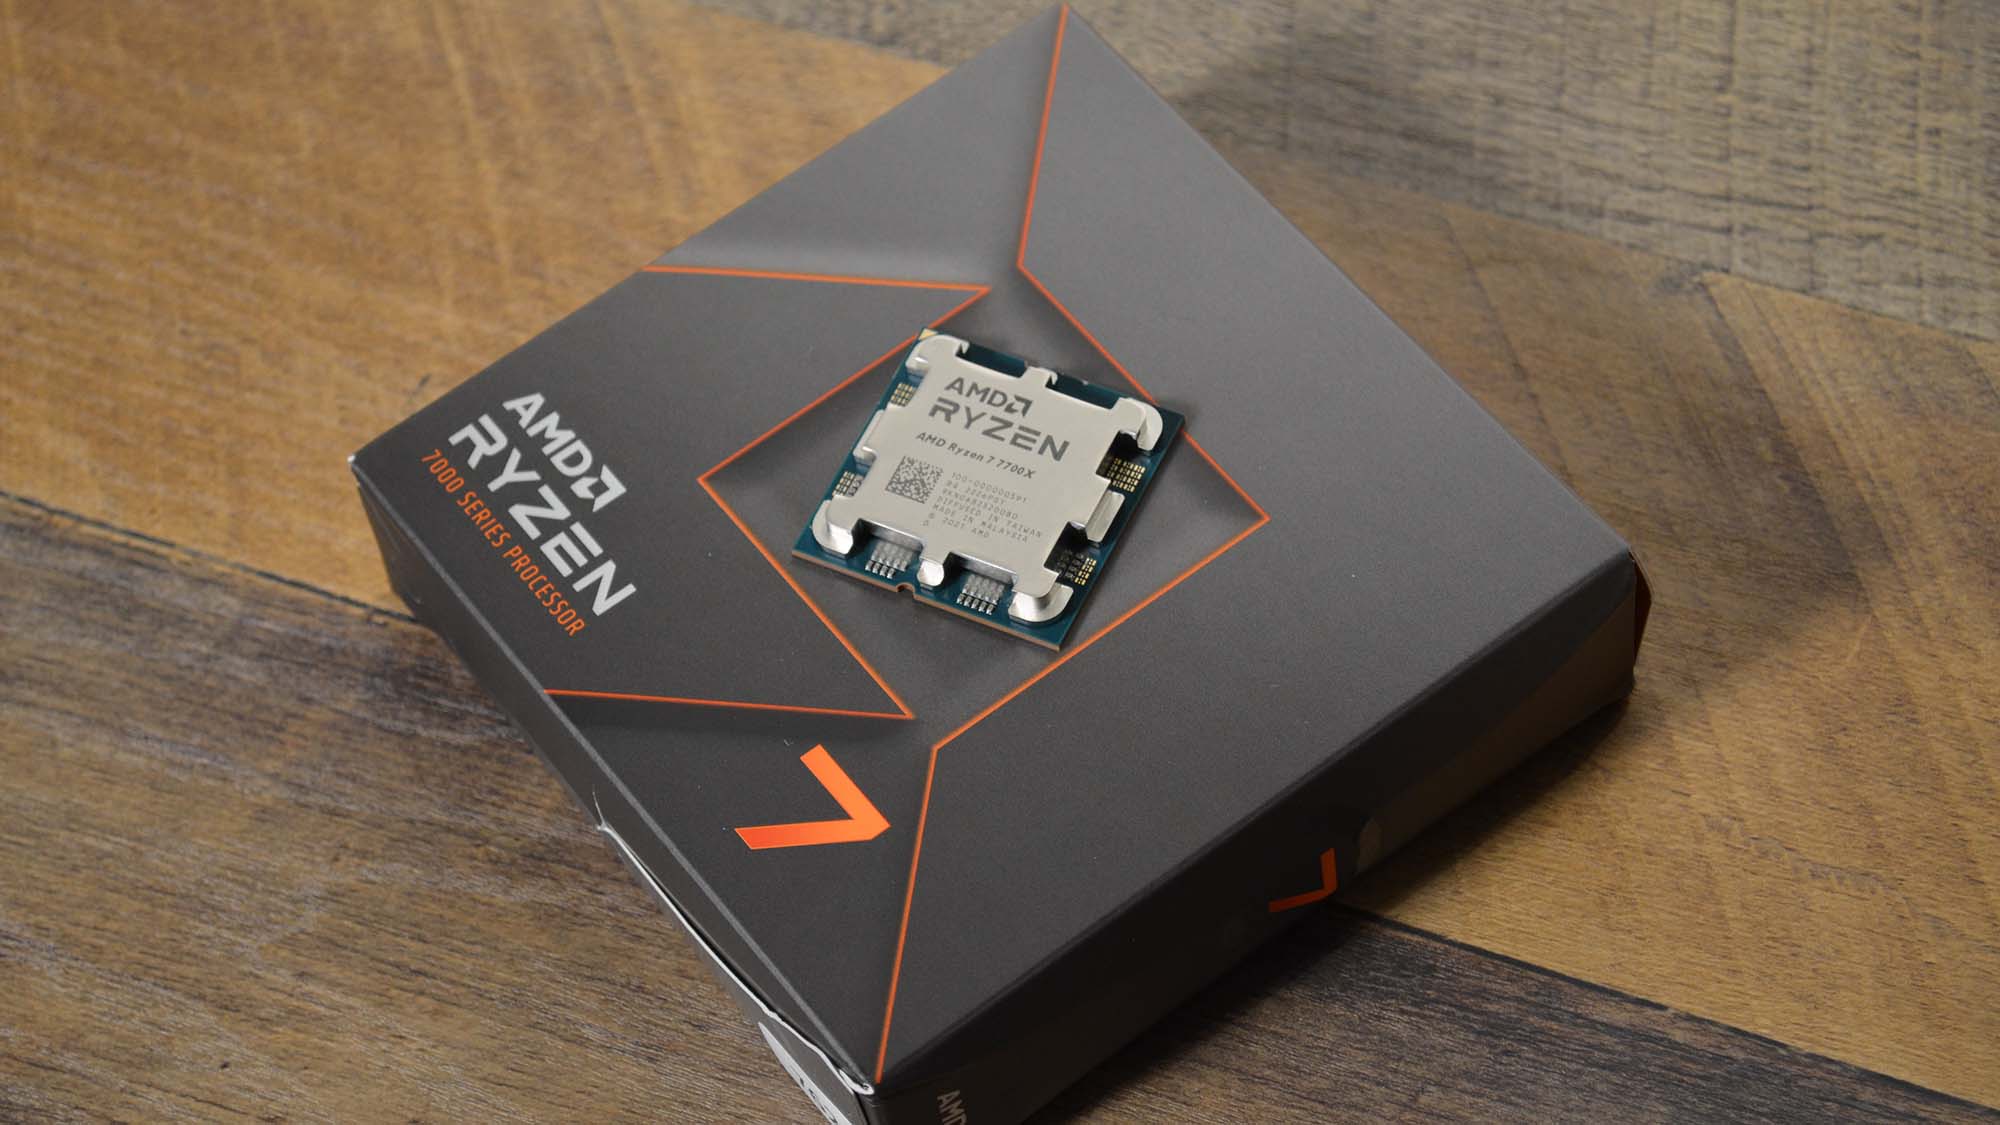 An AMD Ryzen 7 7700X with its retail packaging